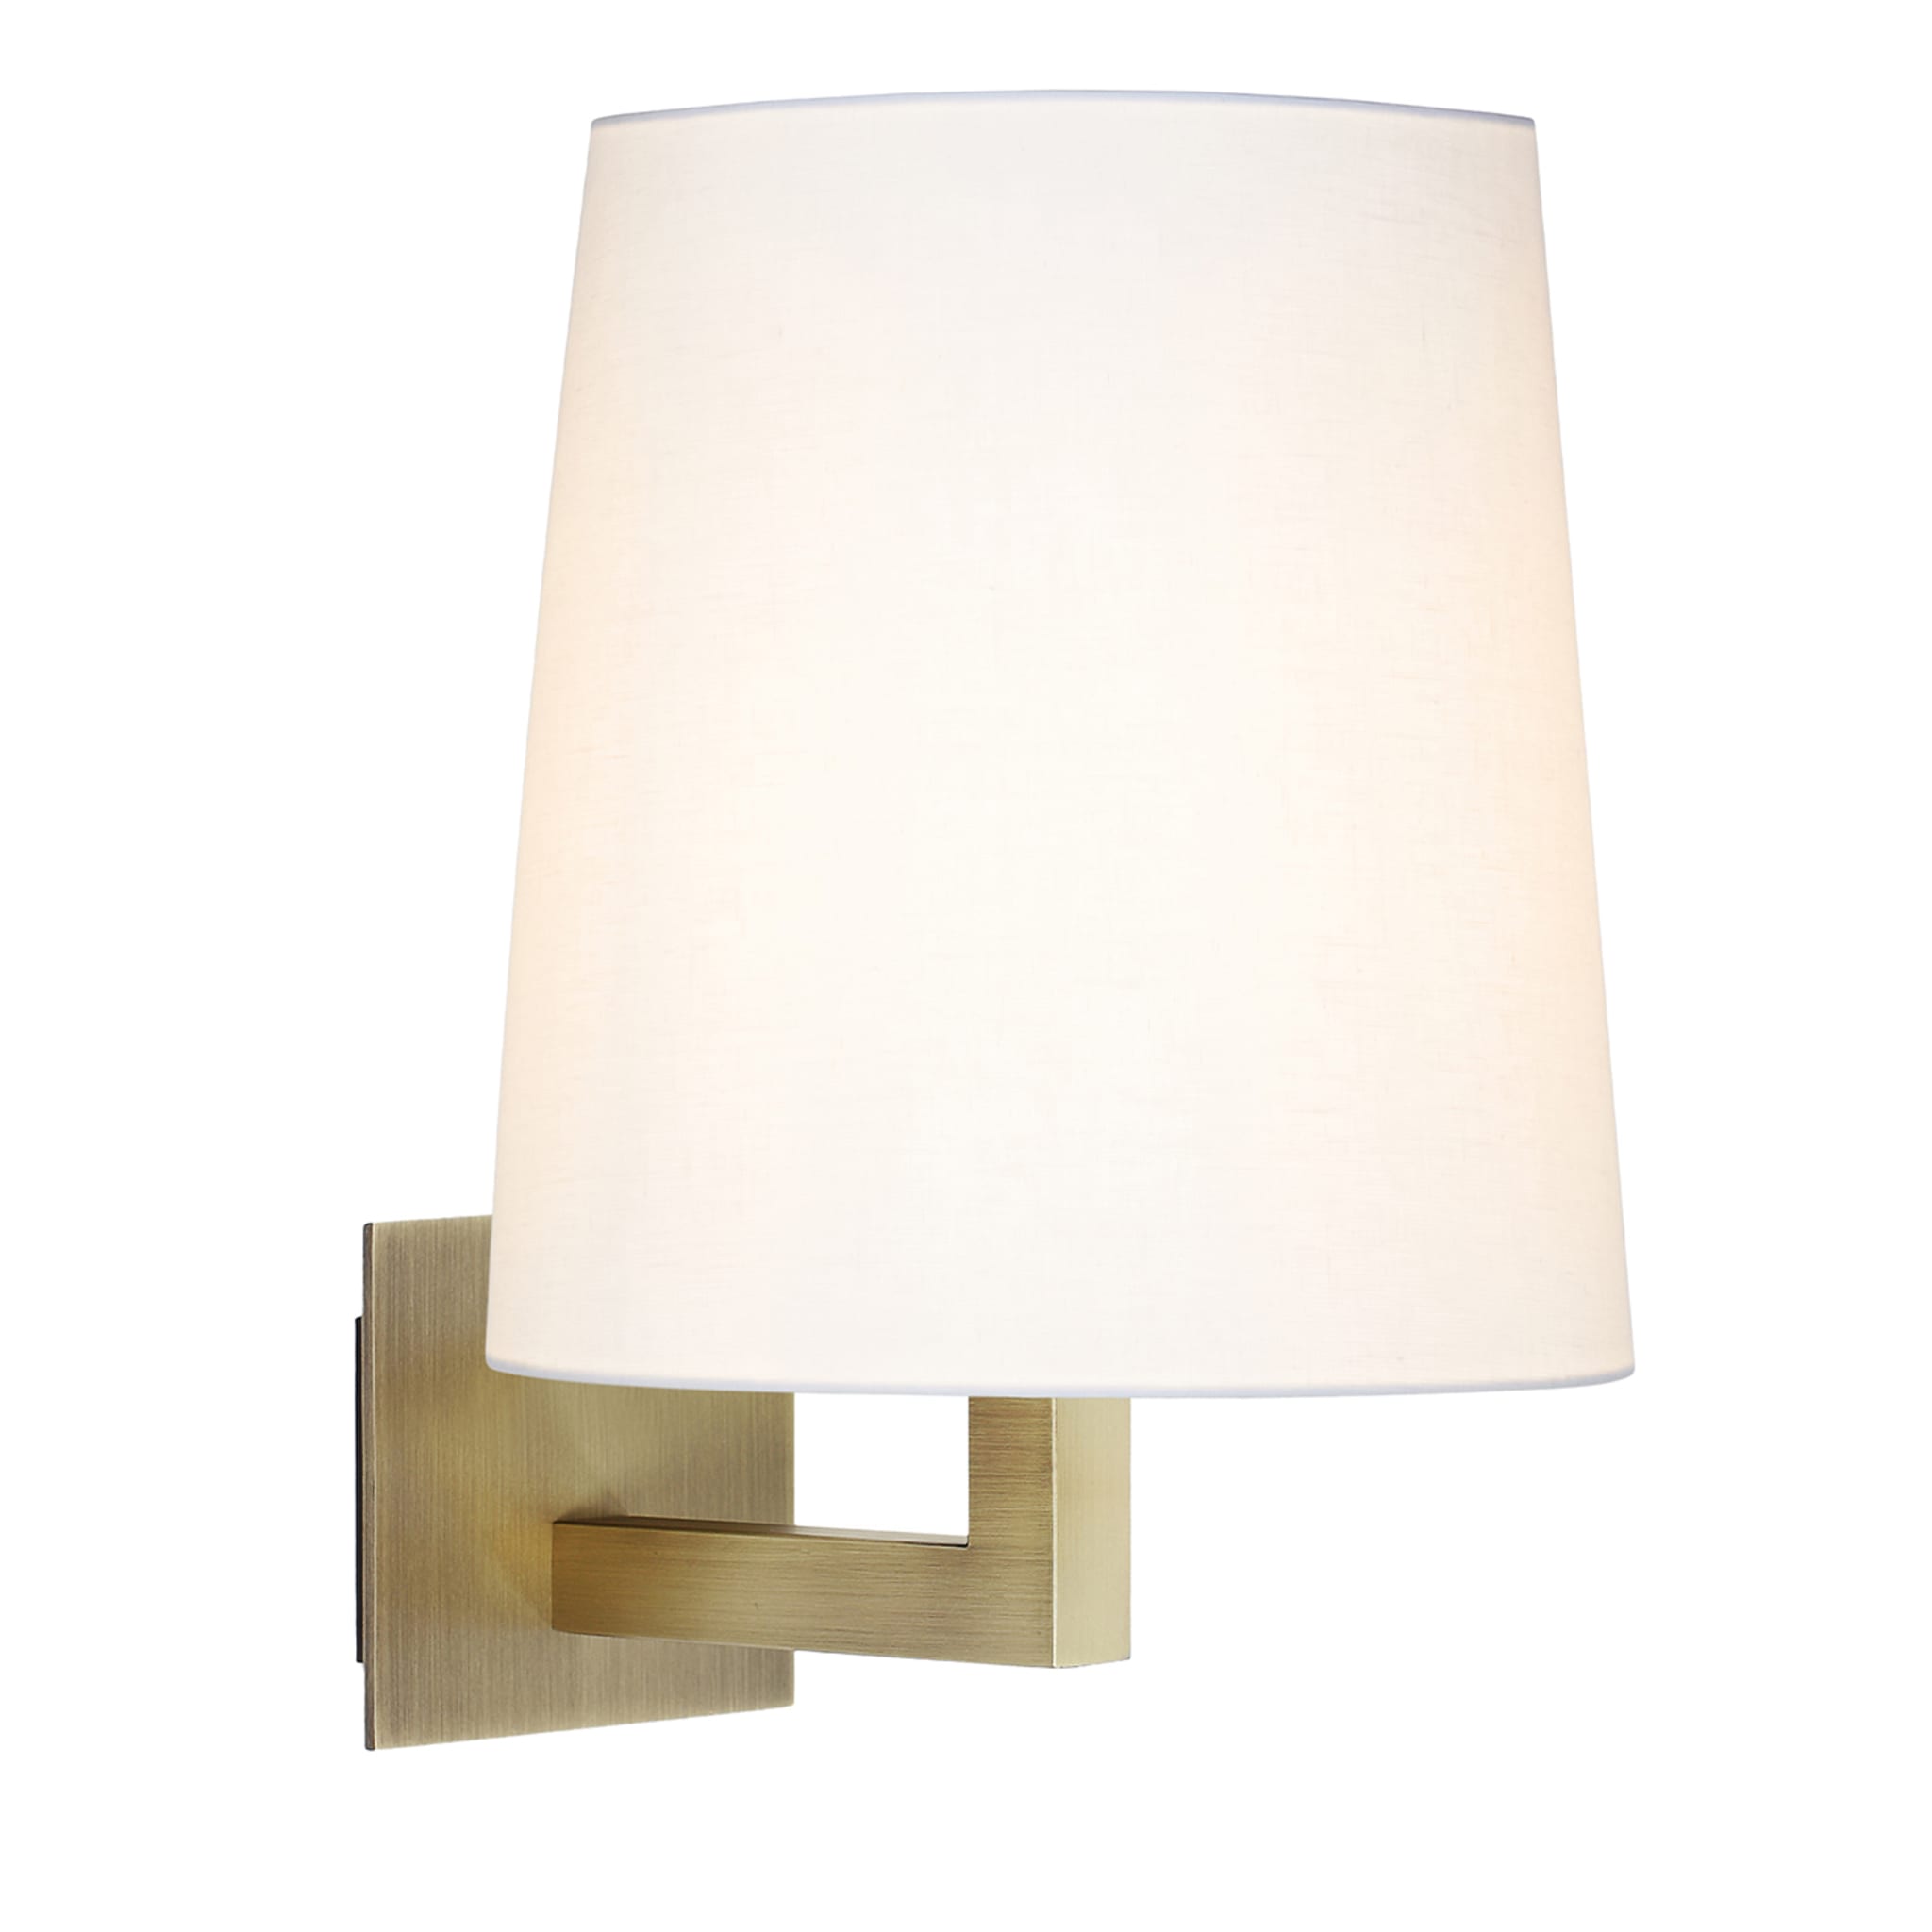 Tonda Bronzed Sconce with White Cotton Shade - Main view